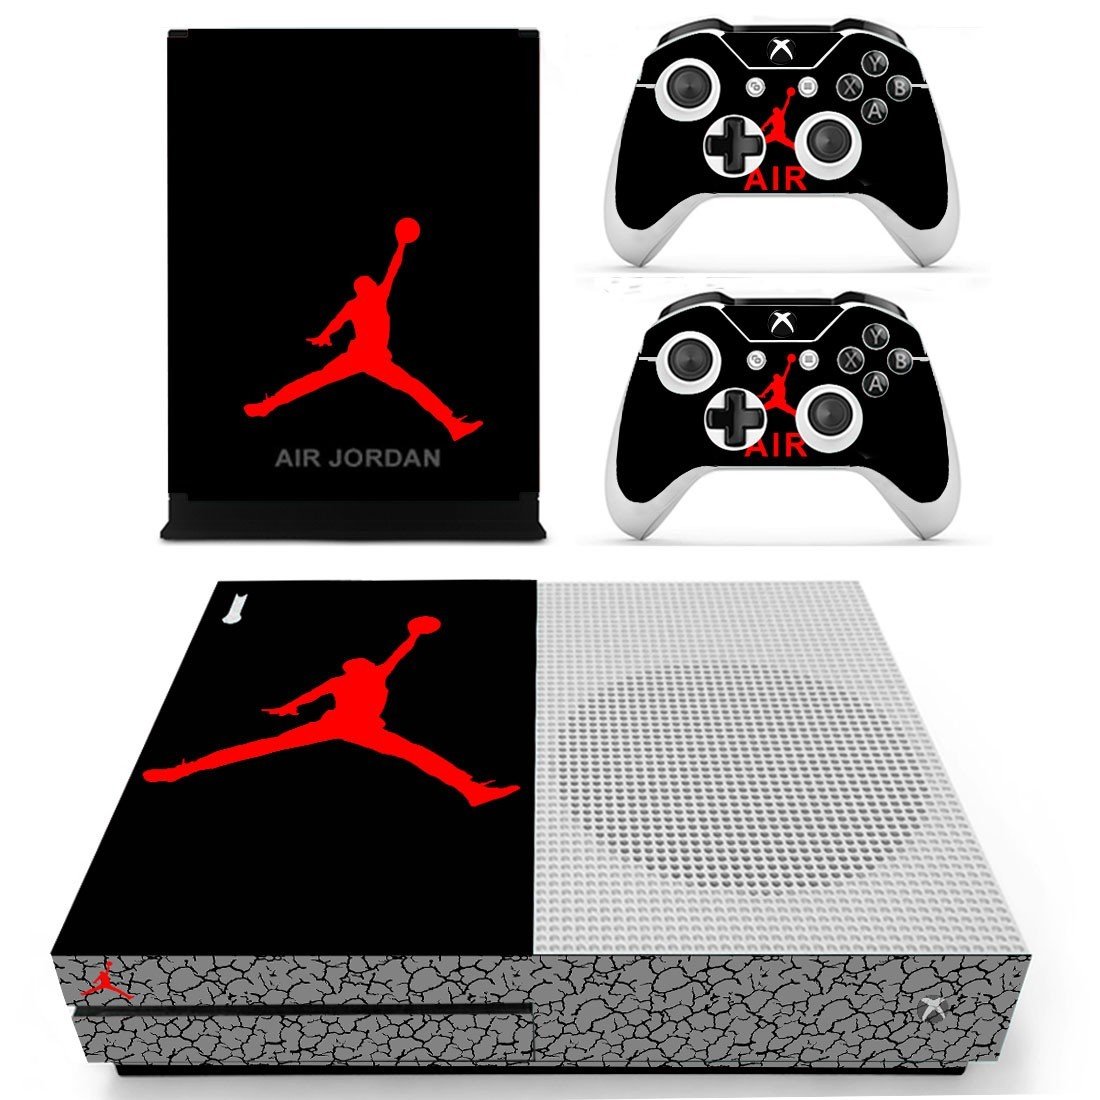 Xbox One S And Controllers Skin Sticker - Jordan 23